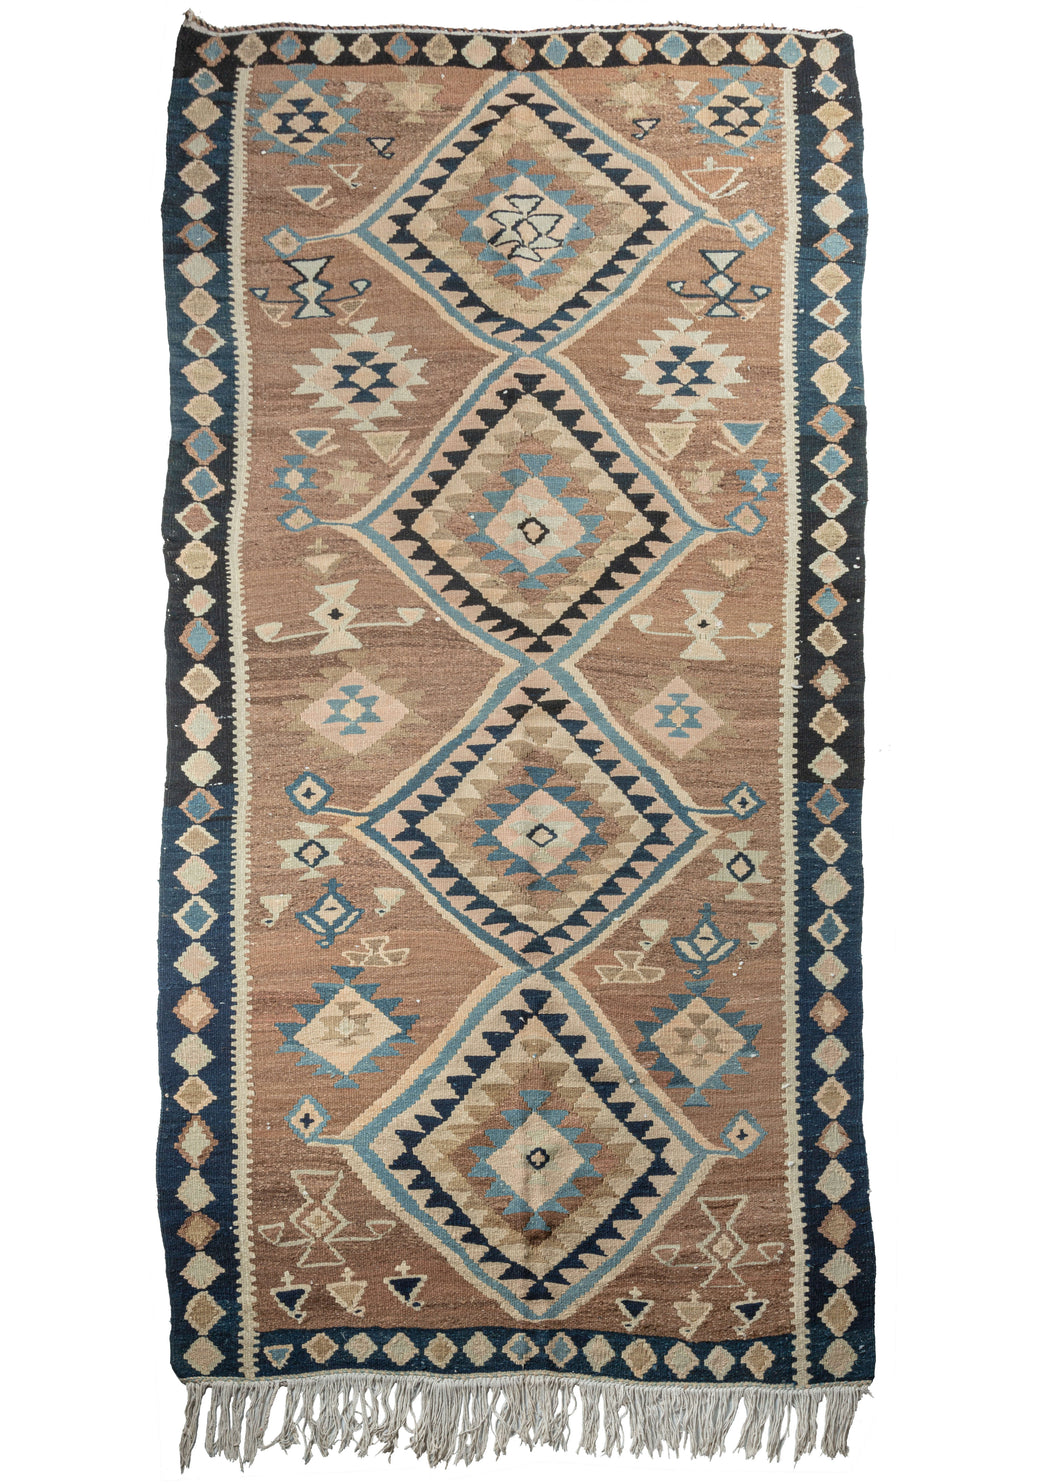 Mid century Shiraz kelleghi runner kilim featuring a design of four vertical diamonds, with concentric zig-zag lines. Shapes and symbols fill in the negative space on the camel field. The border continues the diamond motif with small diamonds in shades of brown on a deep blue ground. 